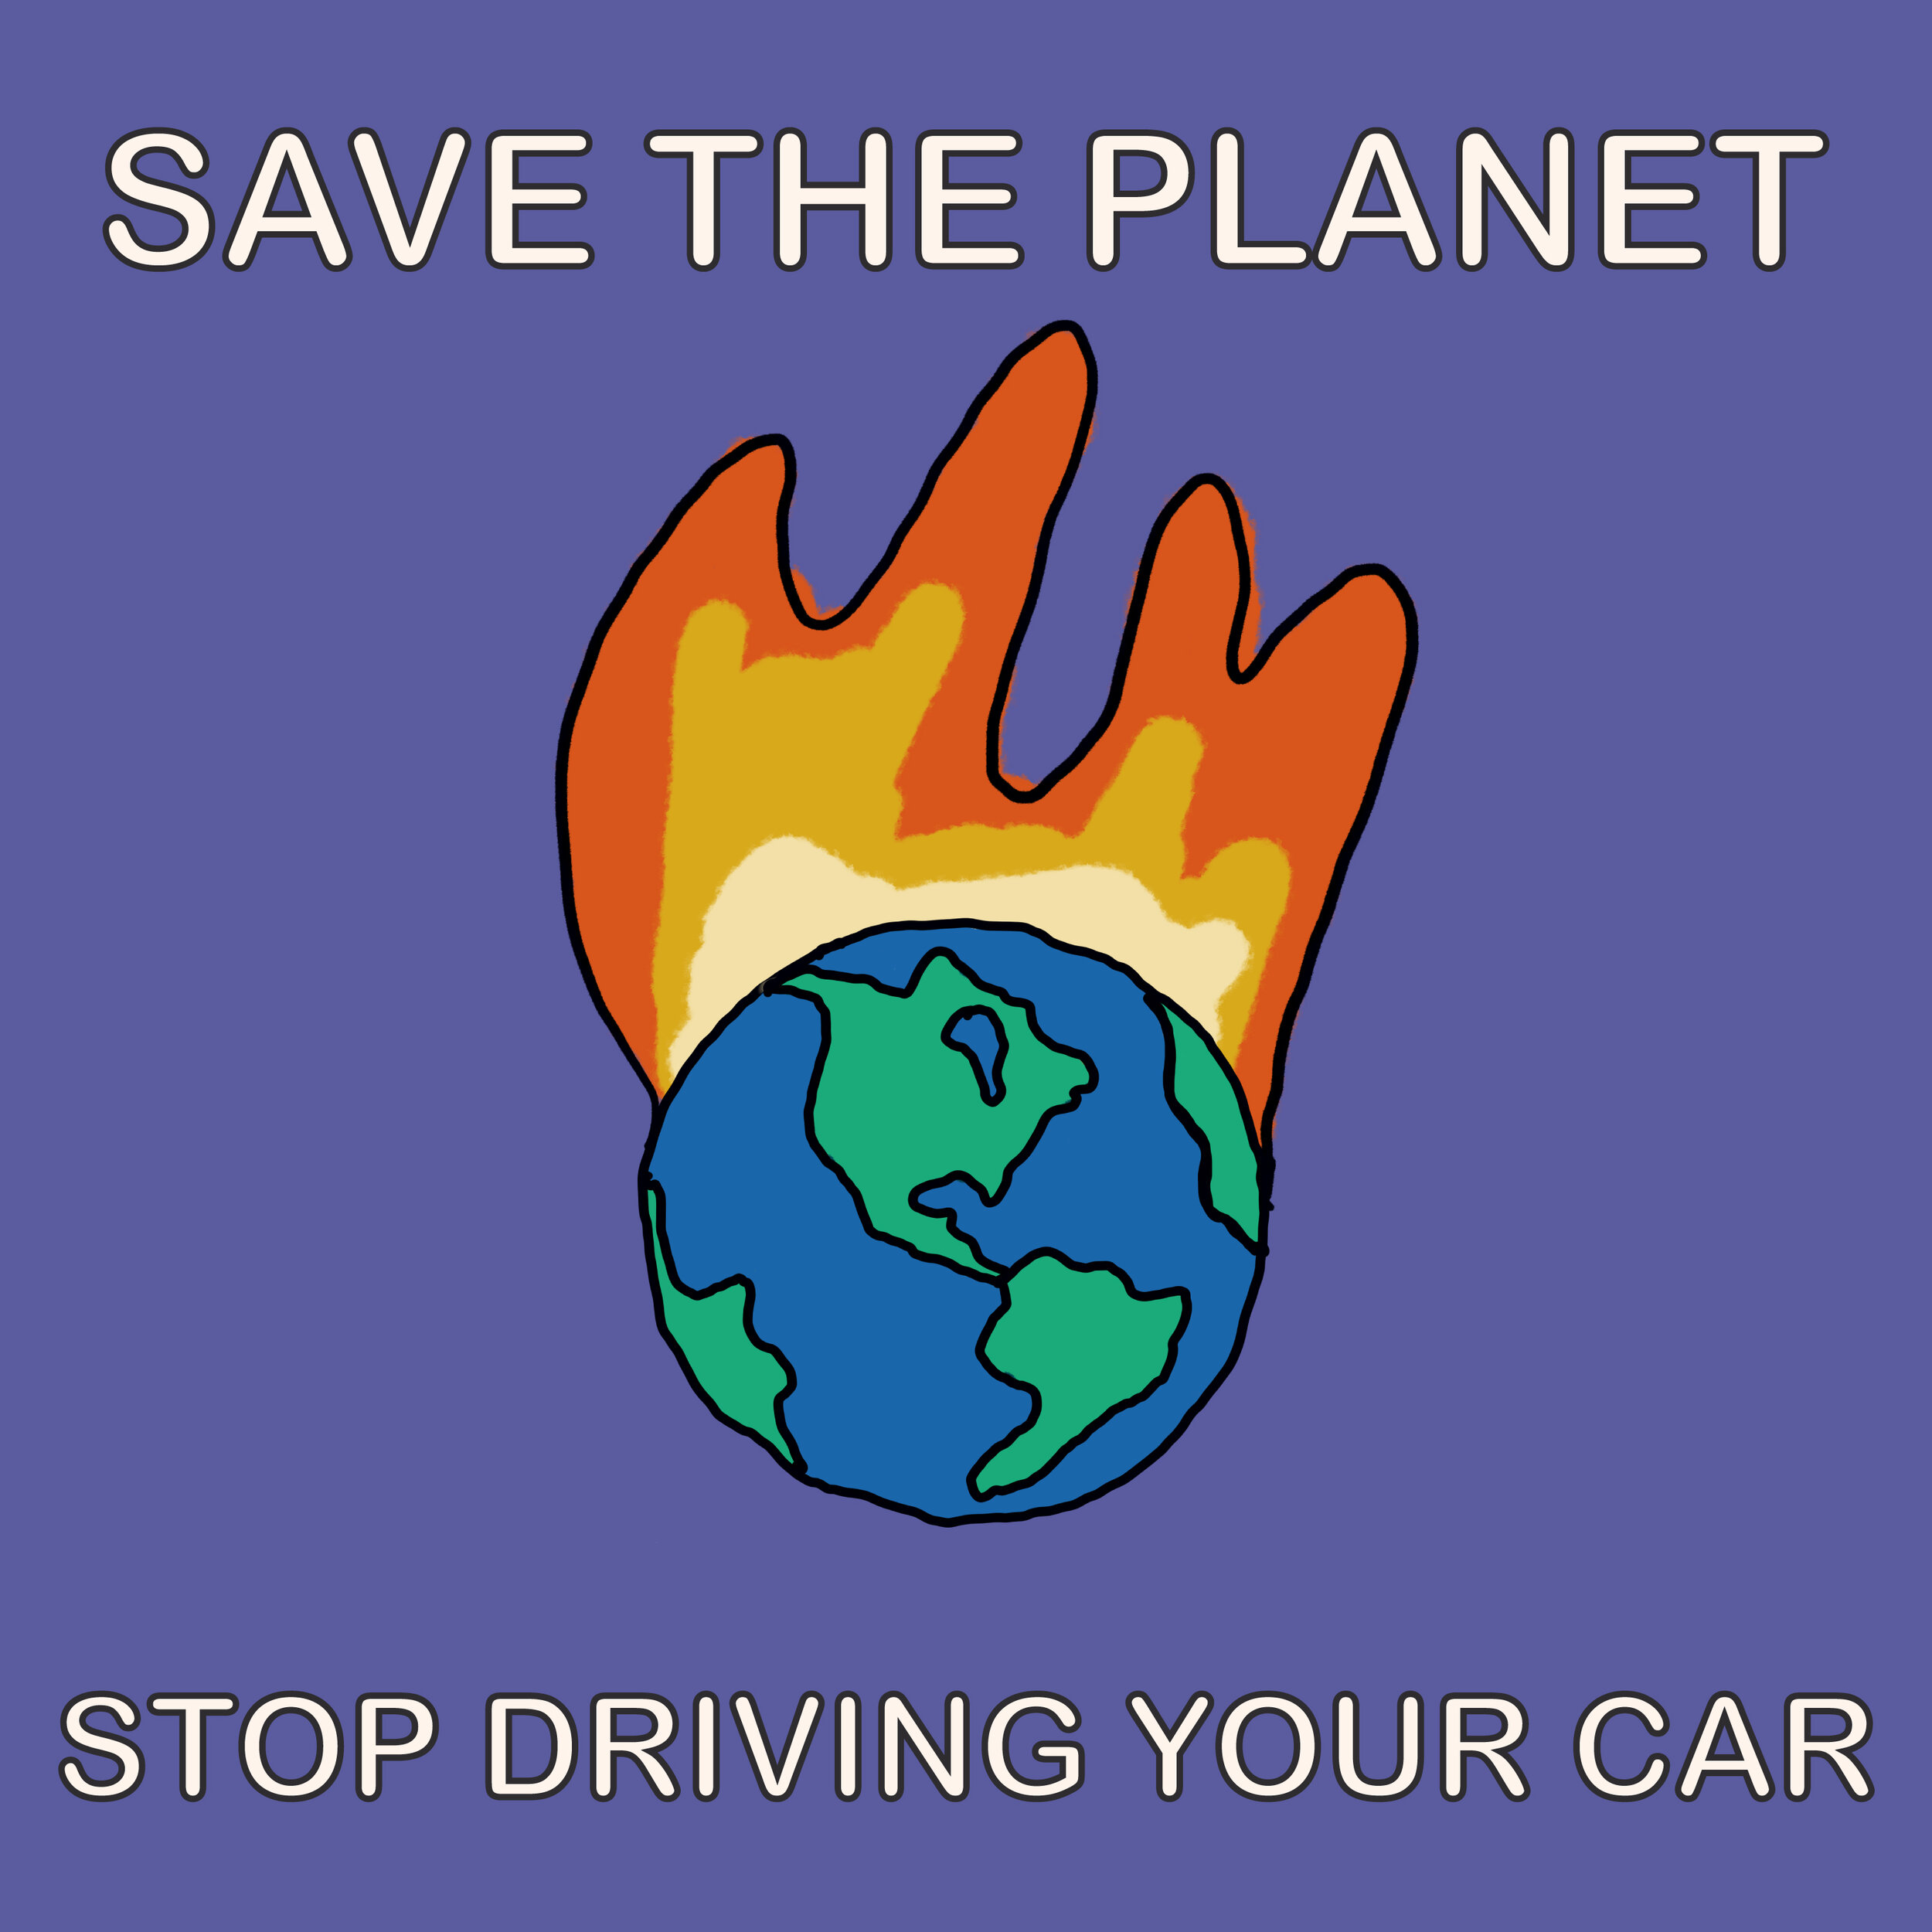 SAVE-THE-PLANET-STOP-DRIVING-YOUR-CAR.jpg